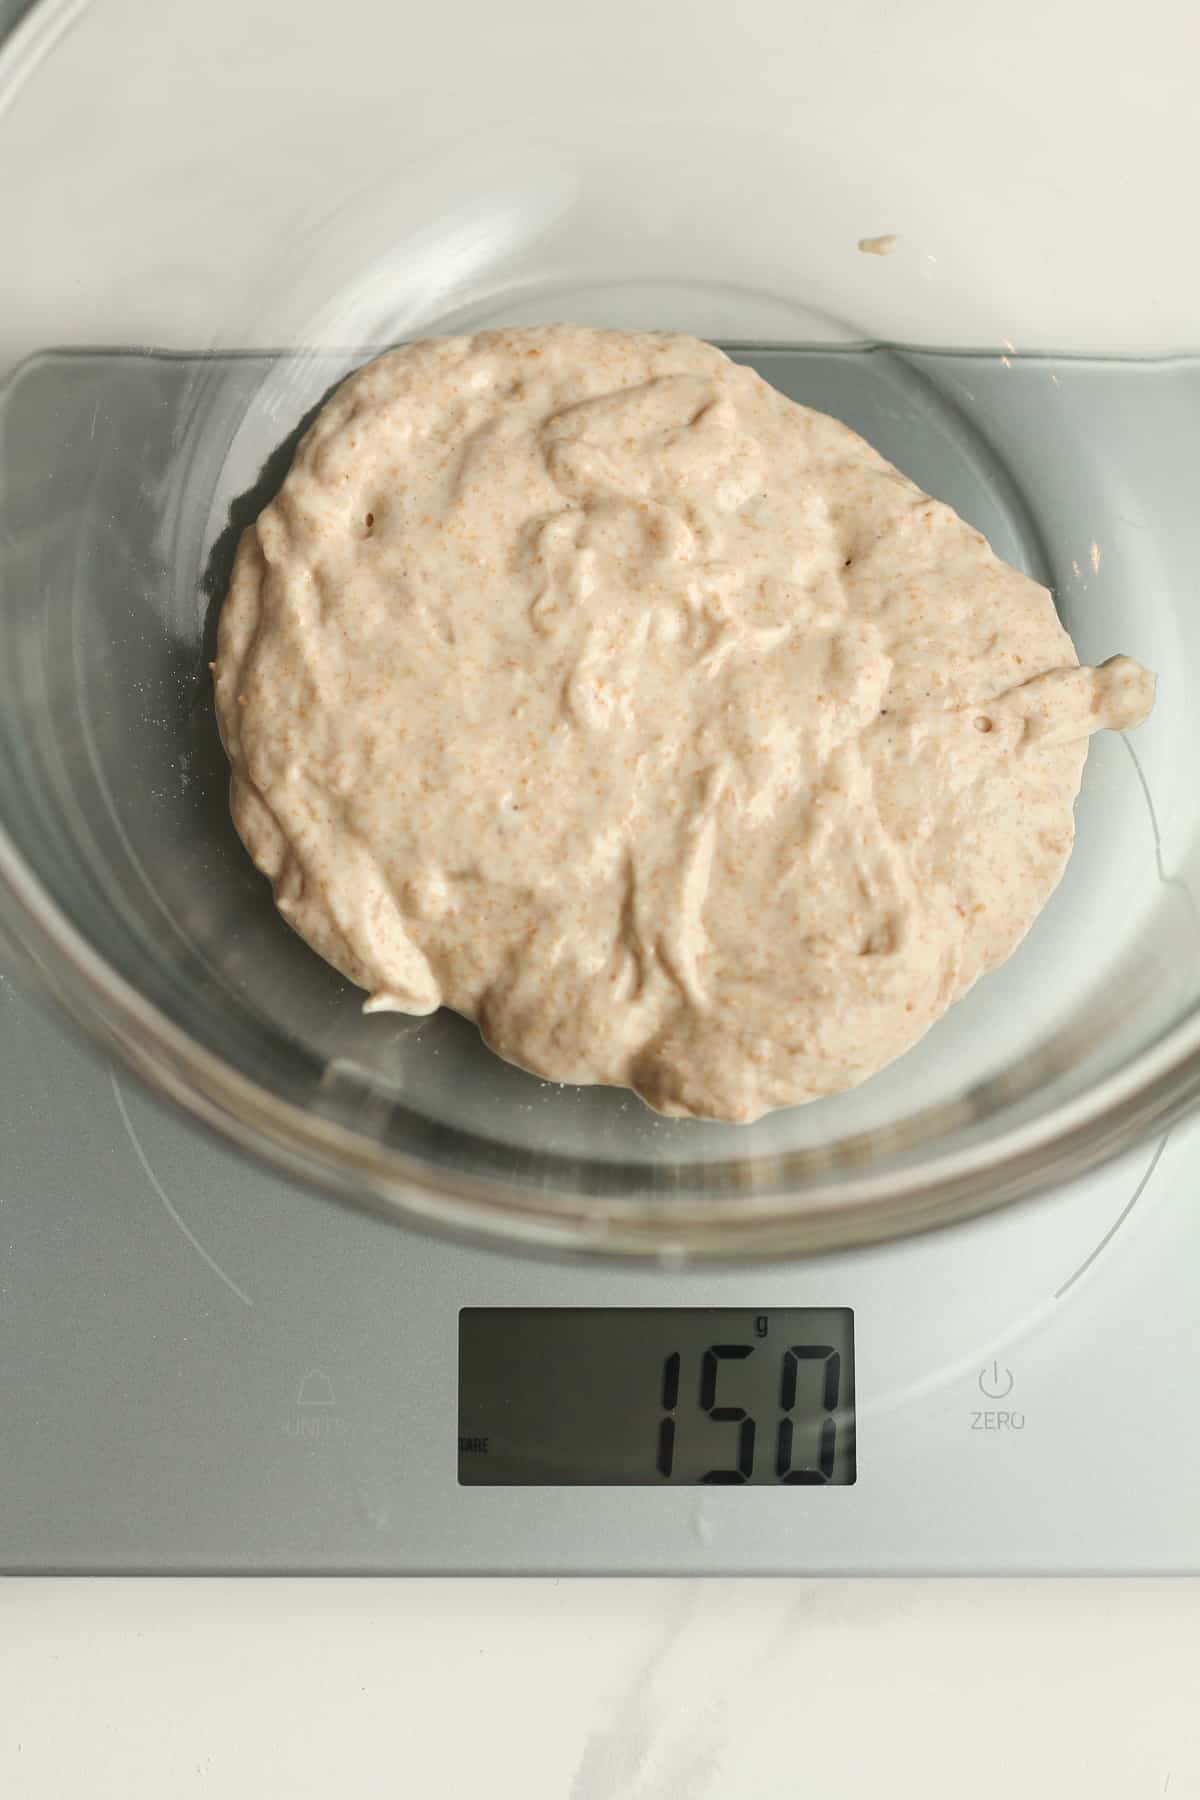 The scale with a bowl of 150 grams of bubbly starter.